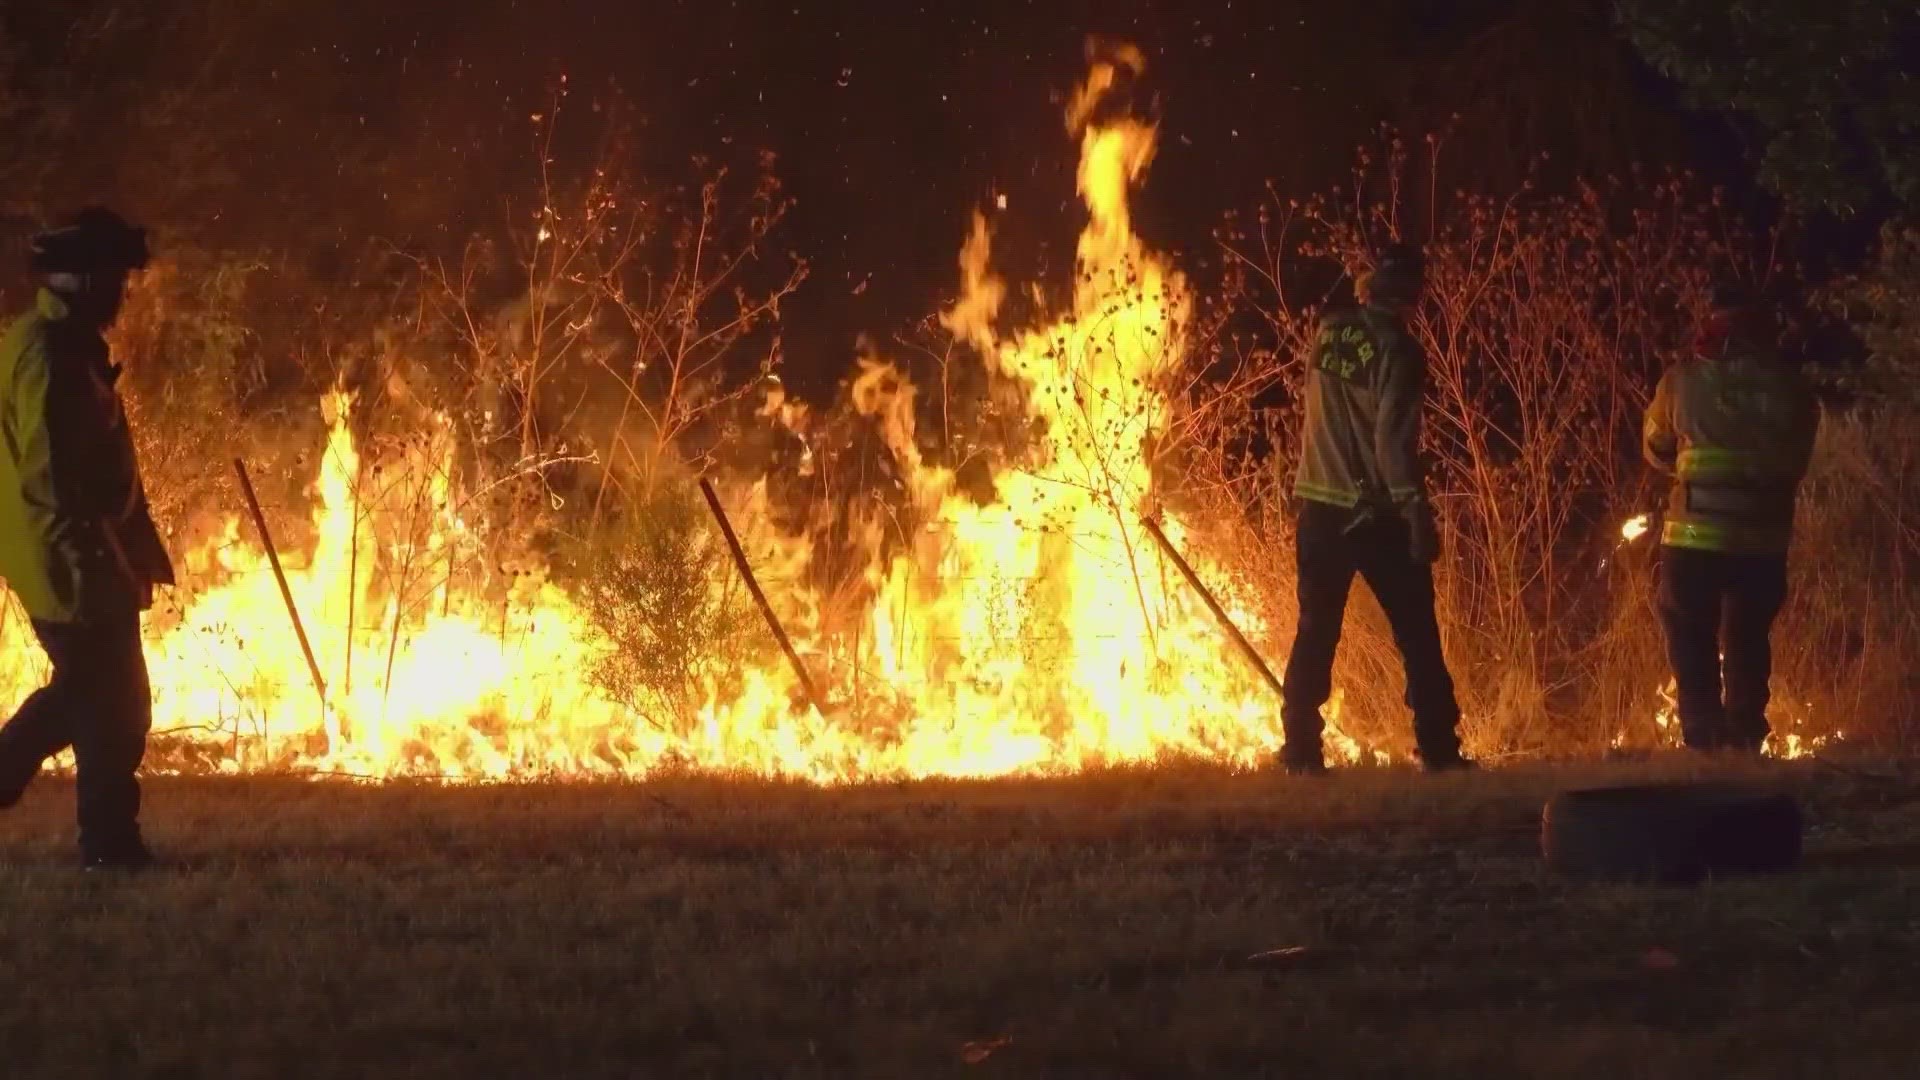 County officials are asking residents to help stop fires as any spark can cause a disaster.